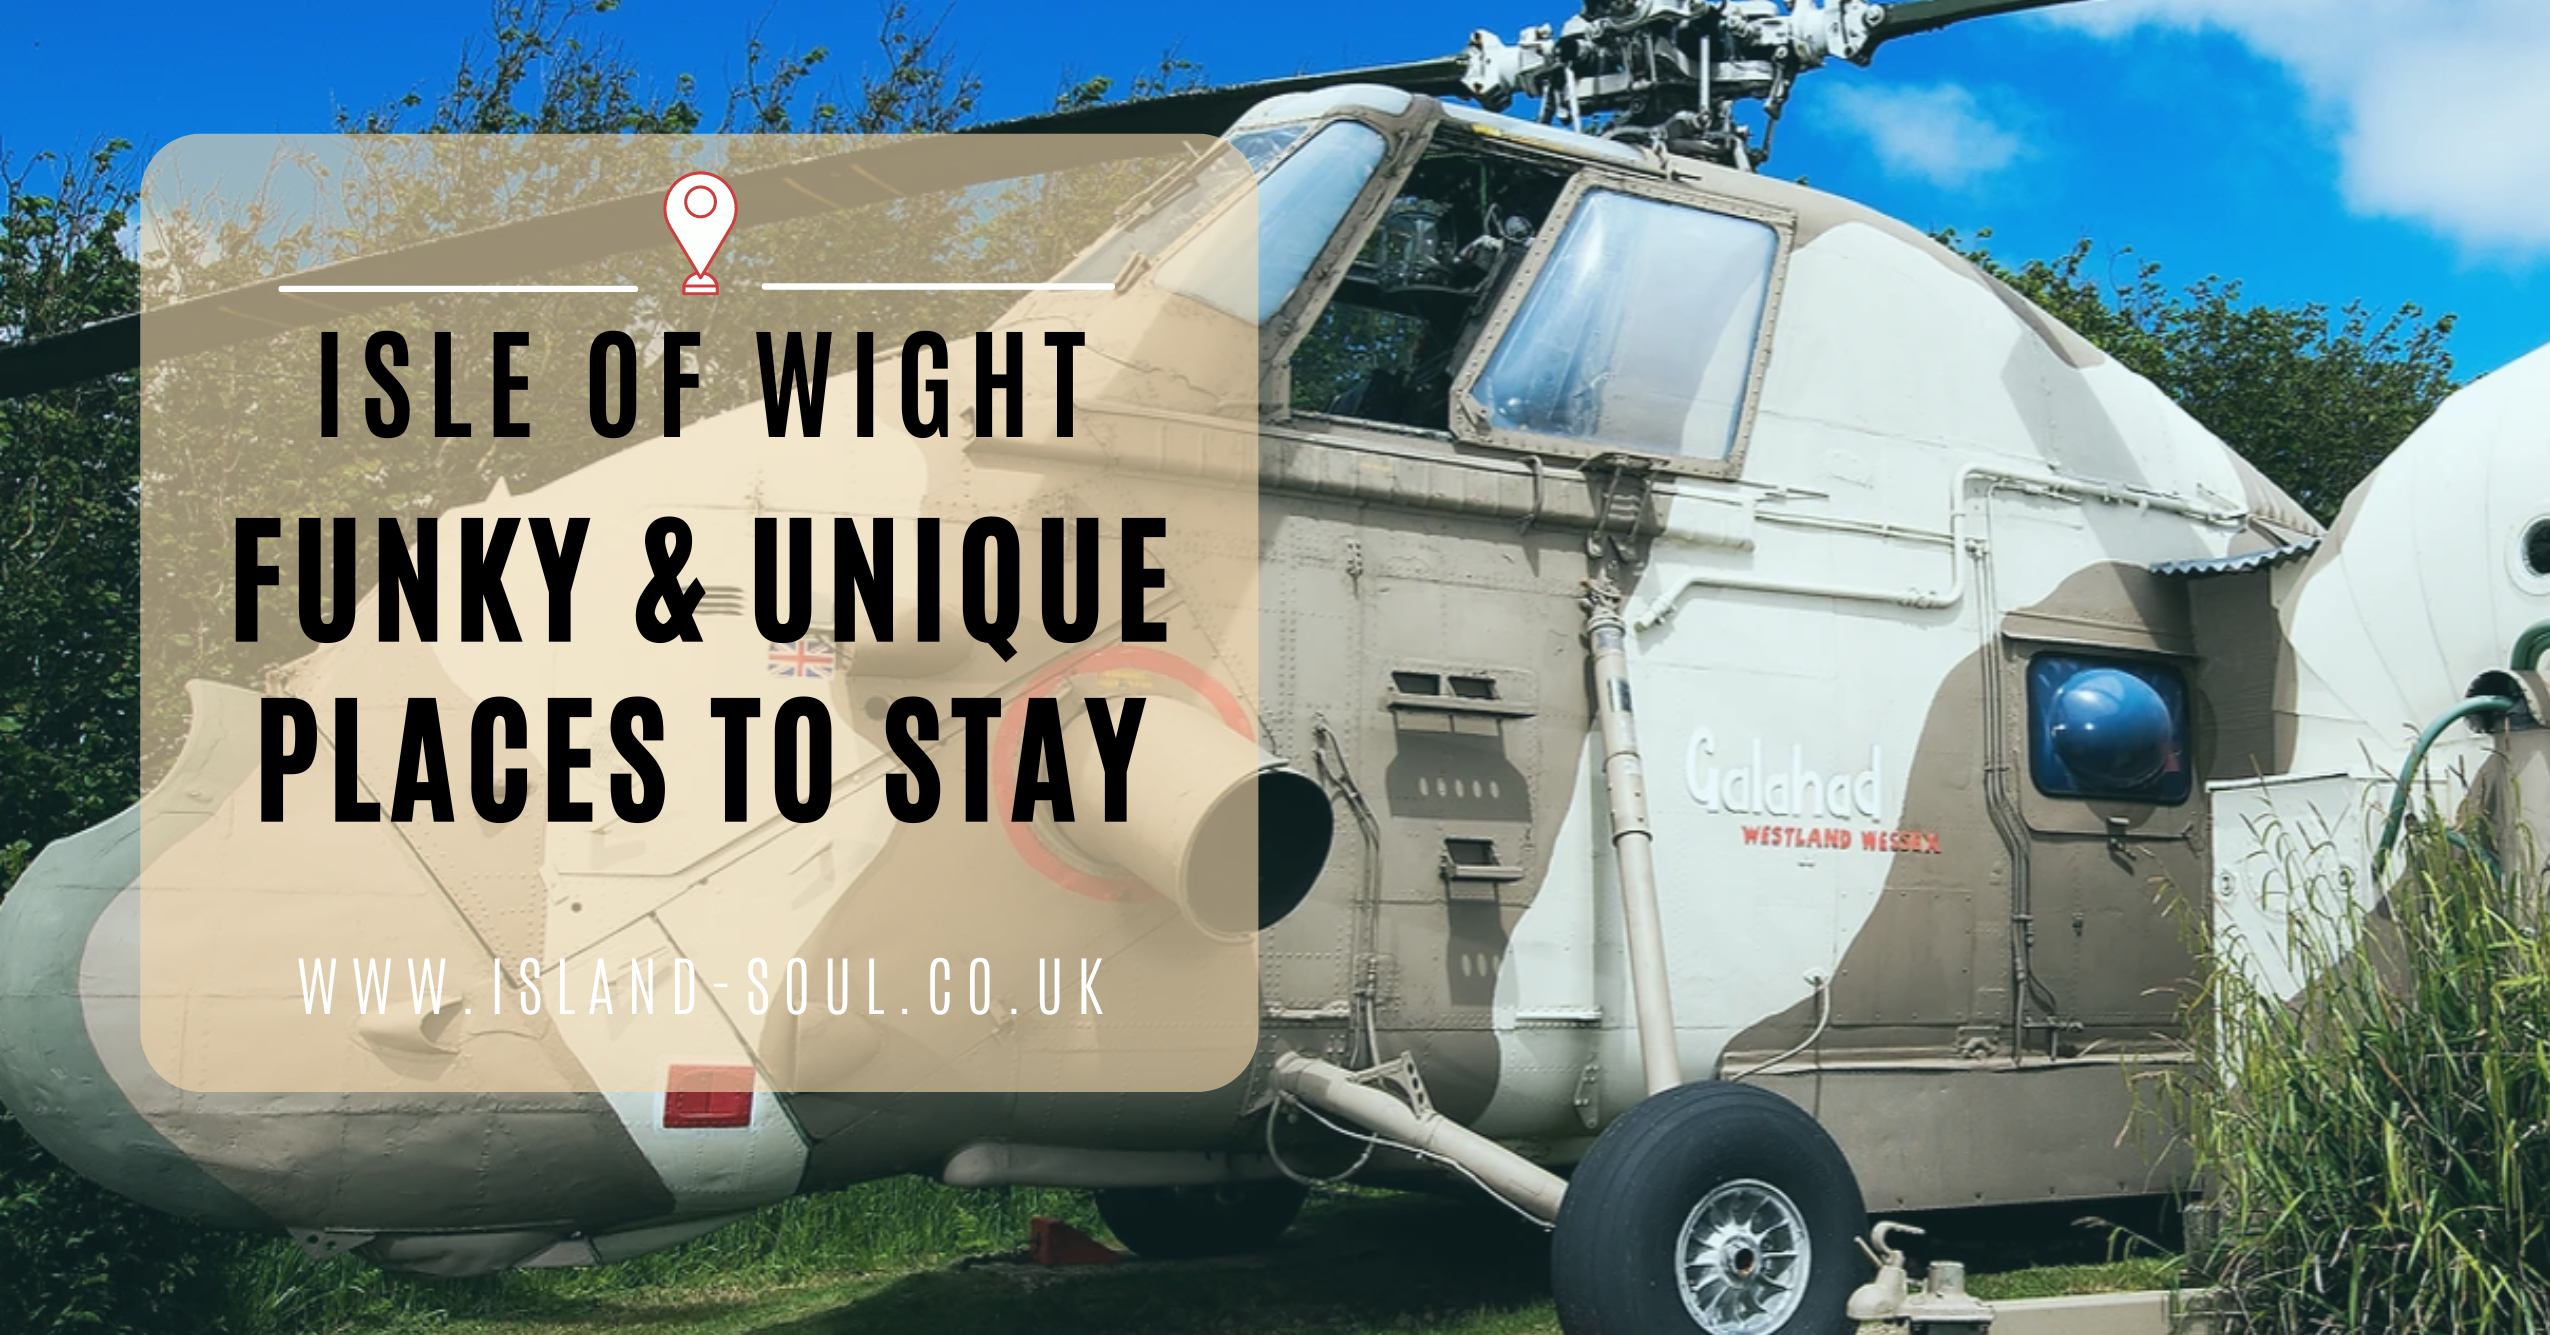 There are lots of interesting places to stay on the Isle of Wight